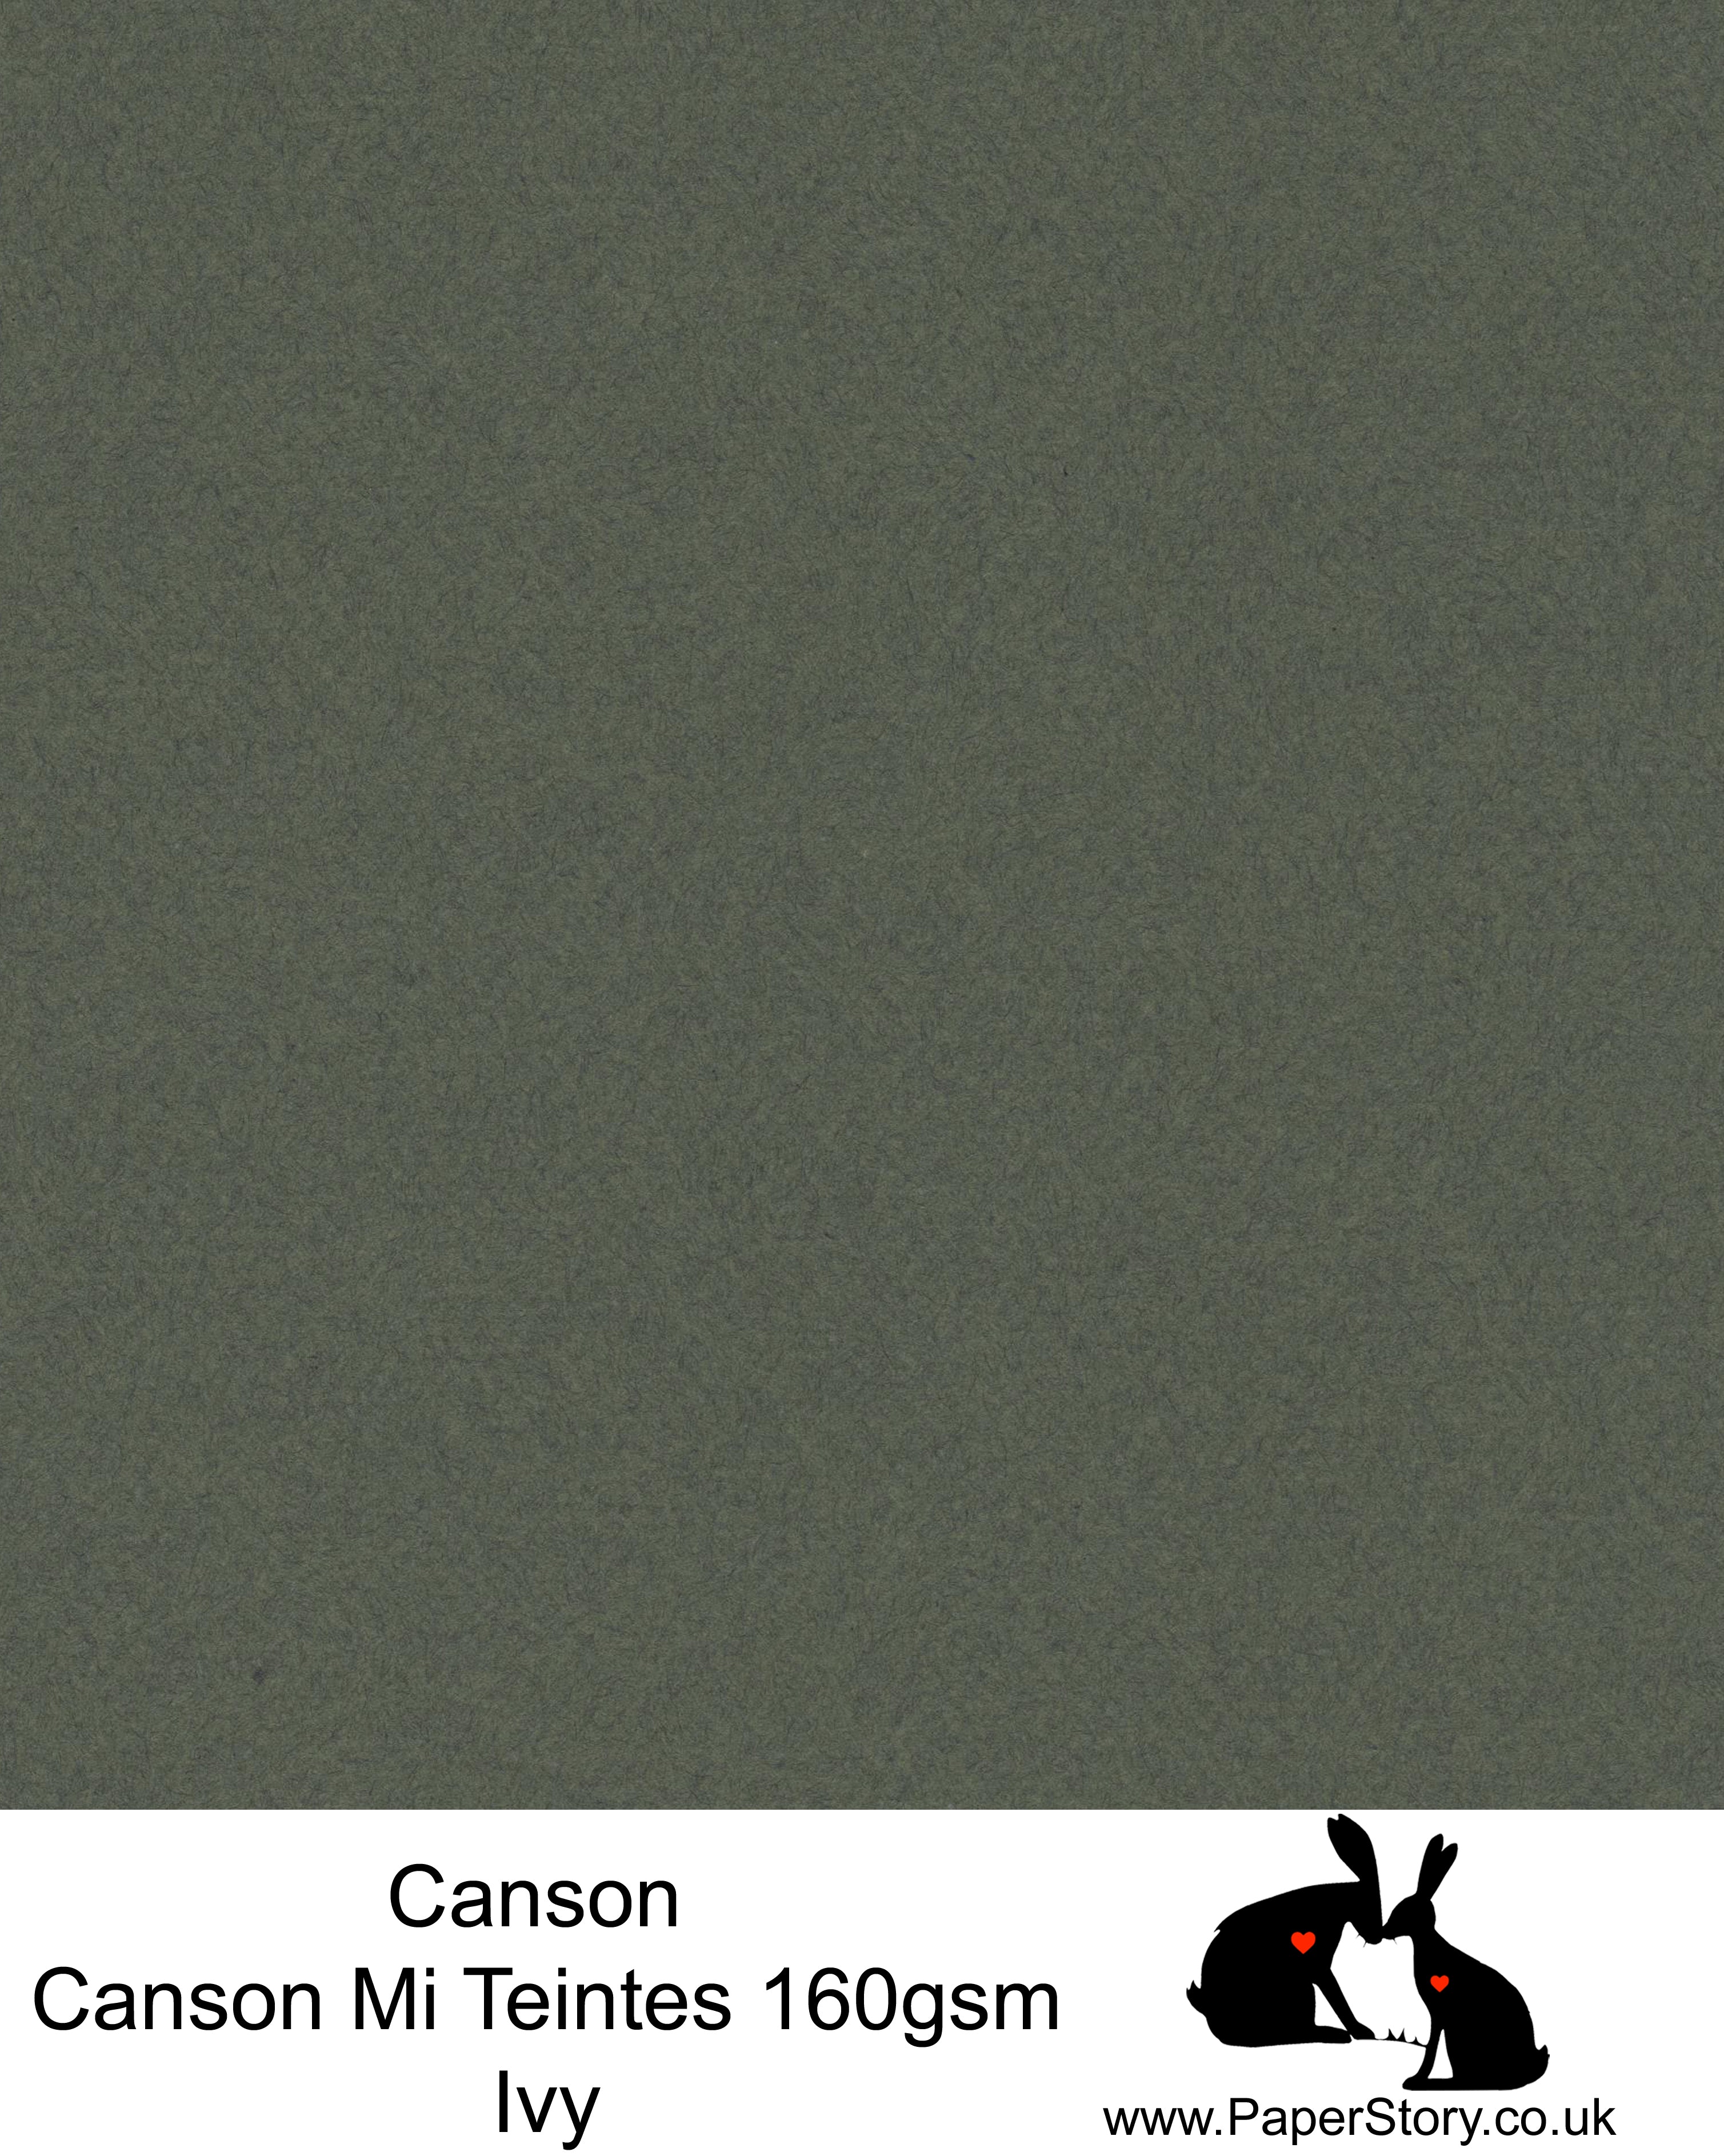 Canson Mi Teintes acid free, Ivy green, hammered texture honeycomb surface paper 160 gsm. This is a popular and classic paper for all artists especially well respected for Pastel  and Papercutting made famous by Paper Panda. This paper has a honeycombed finish one side and fine grain the other. An authentic art paper, acid free with a  very high 50% cotton content. Canson Mi-Teintes complies with the ISO 9706 standard on permanence, a guarantee of excellent conservation  